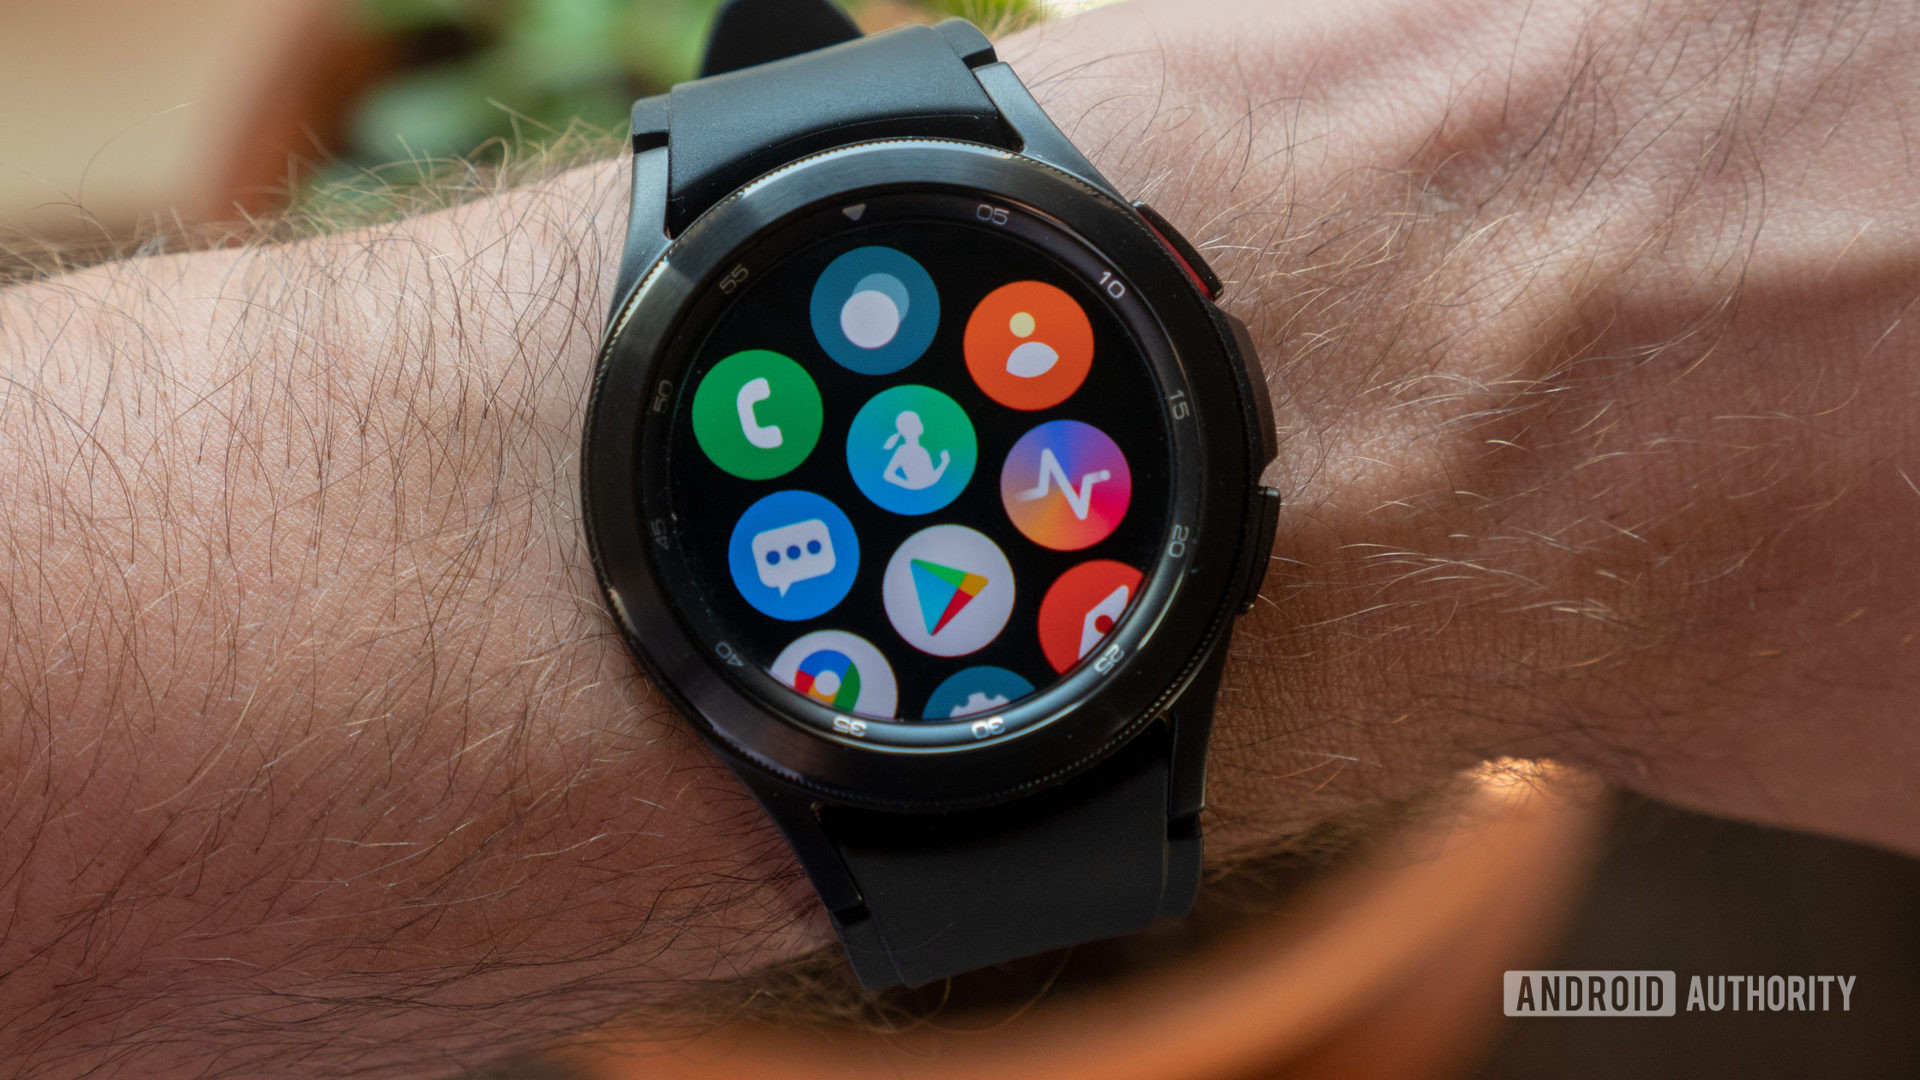 The Samsung Galaxy Watch 4 Classic, currently one of the only Wear OS 3 watches available, on wrist showing the all apps screen containing Samsung Health, the Google Play Store, and others